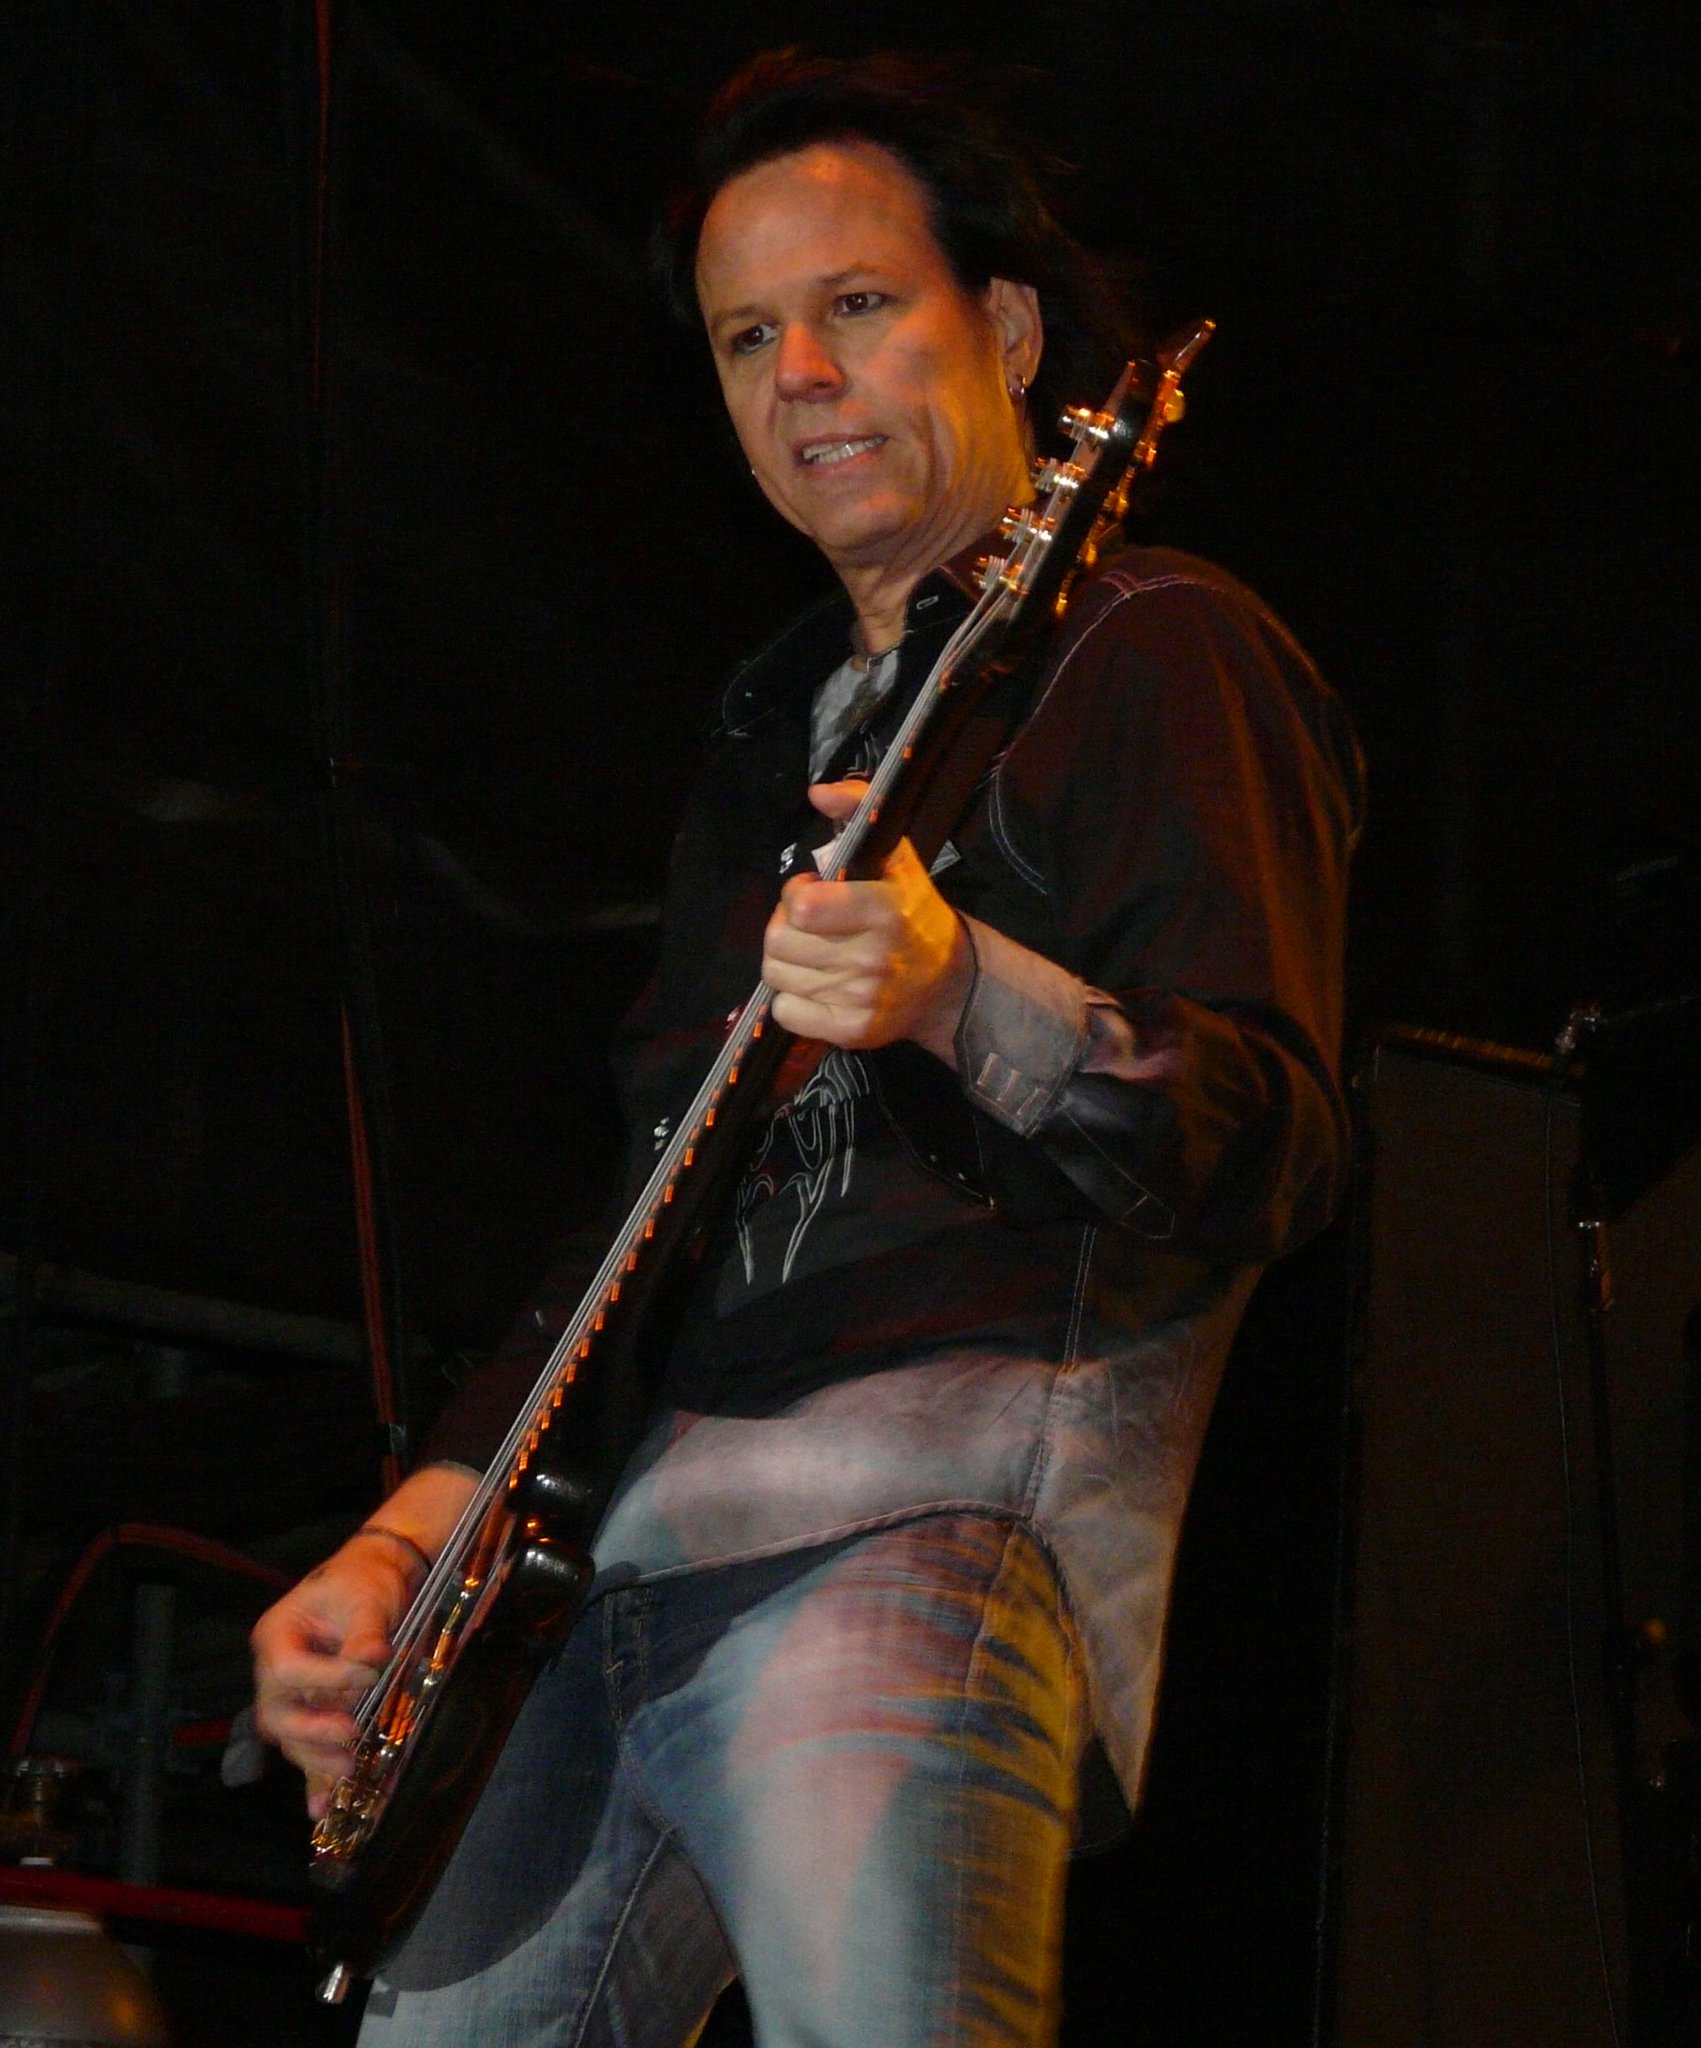 Please join us here at in wishing the one and only Bobby Dall a very Happy 57th Birthday today  